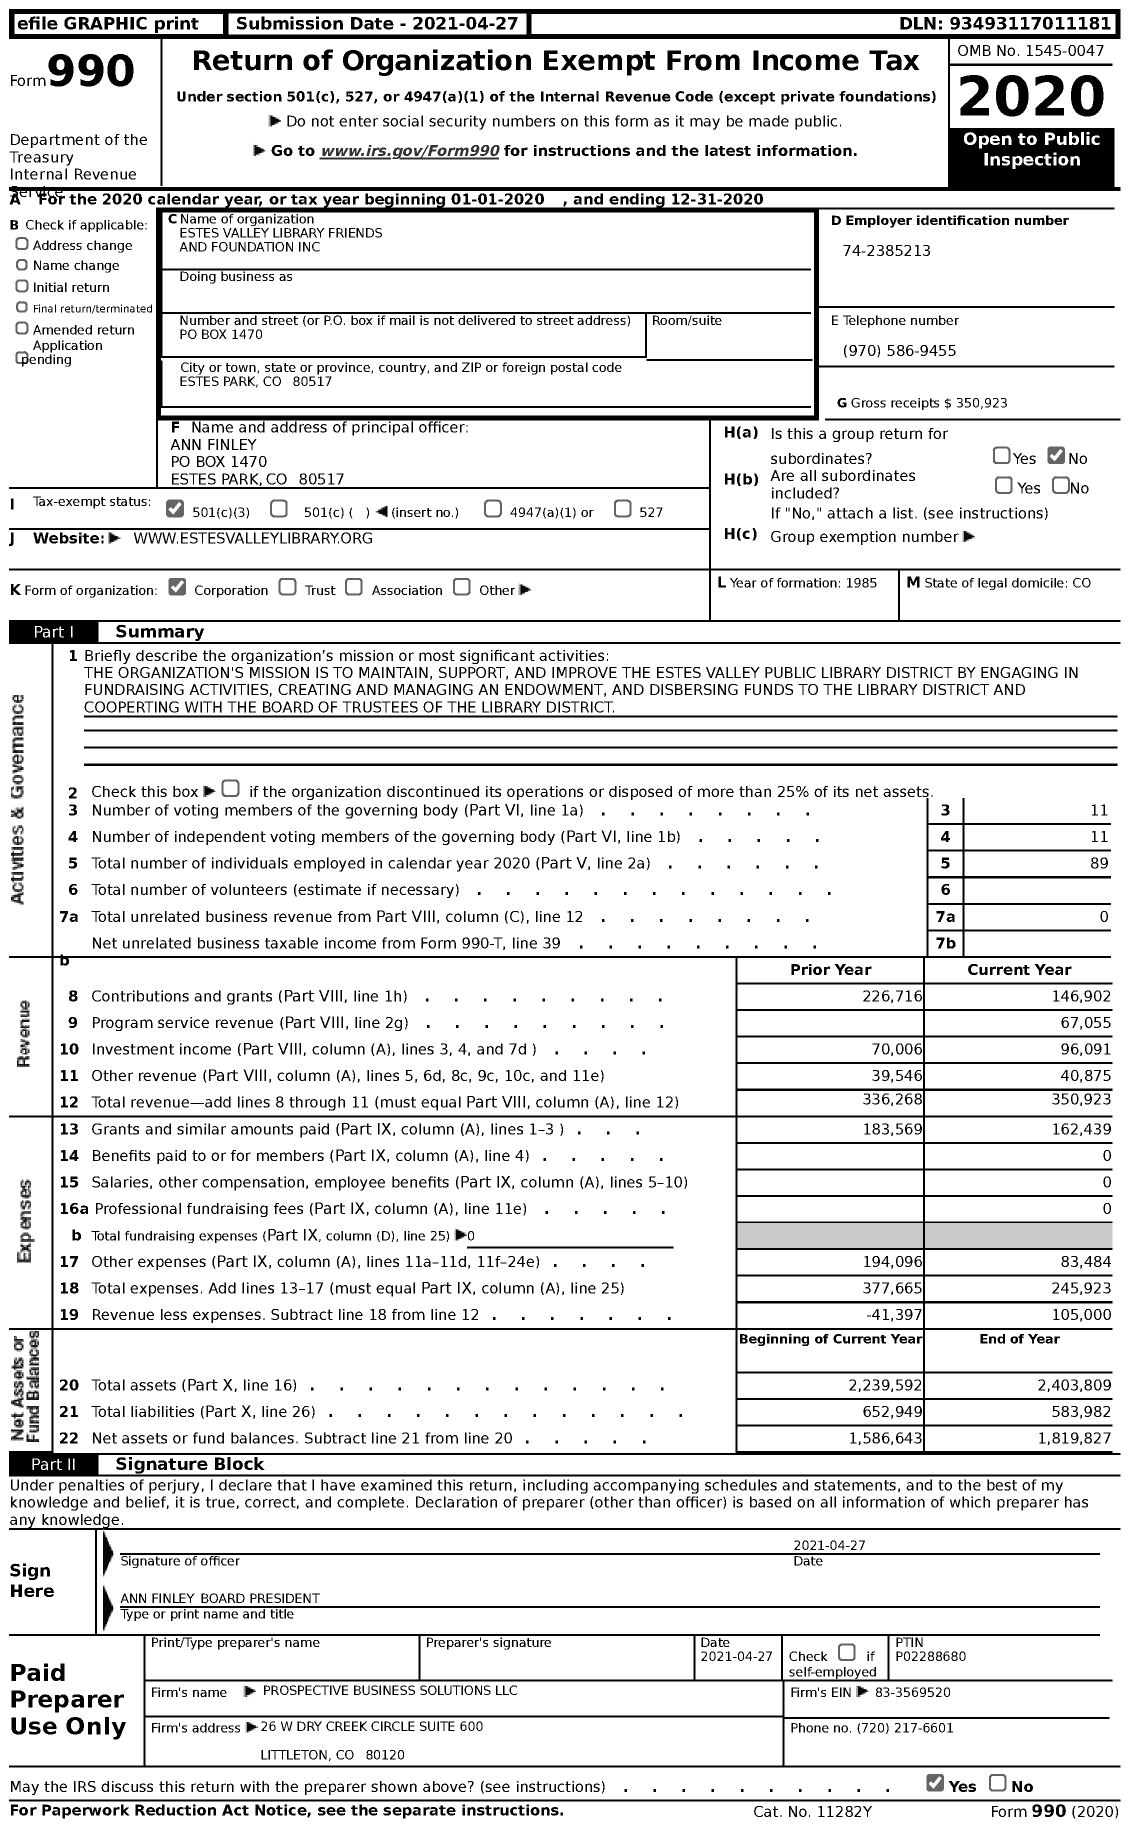 Image of first page of 2020 Form 990 for Estes Valley Library Friends and Foundation